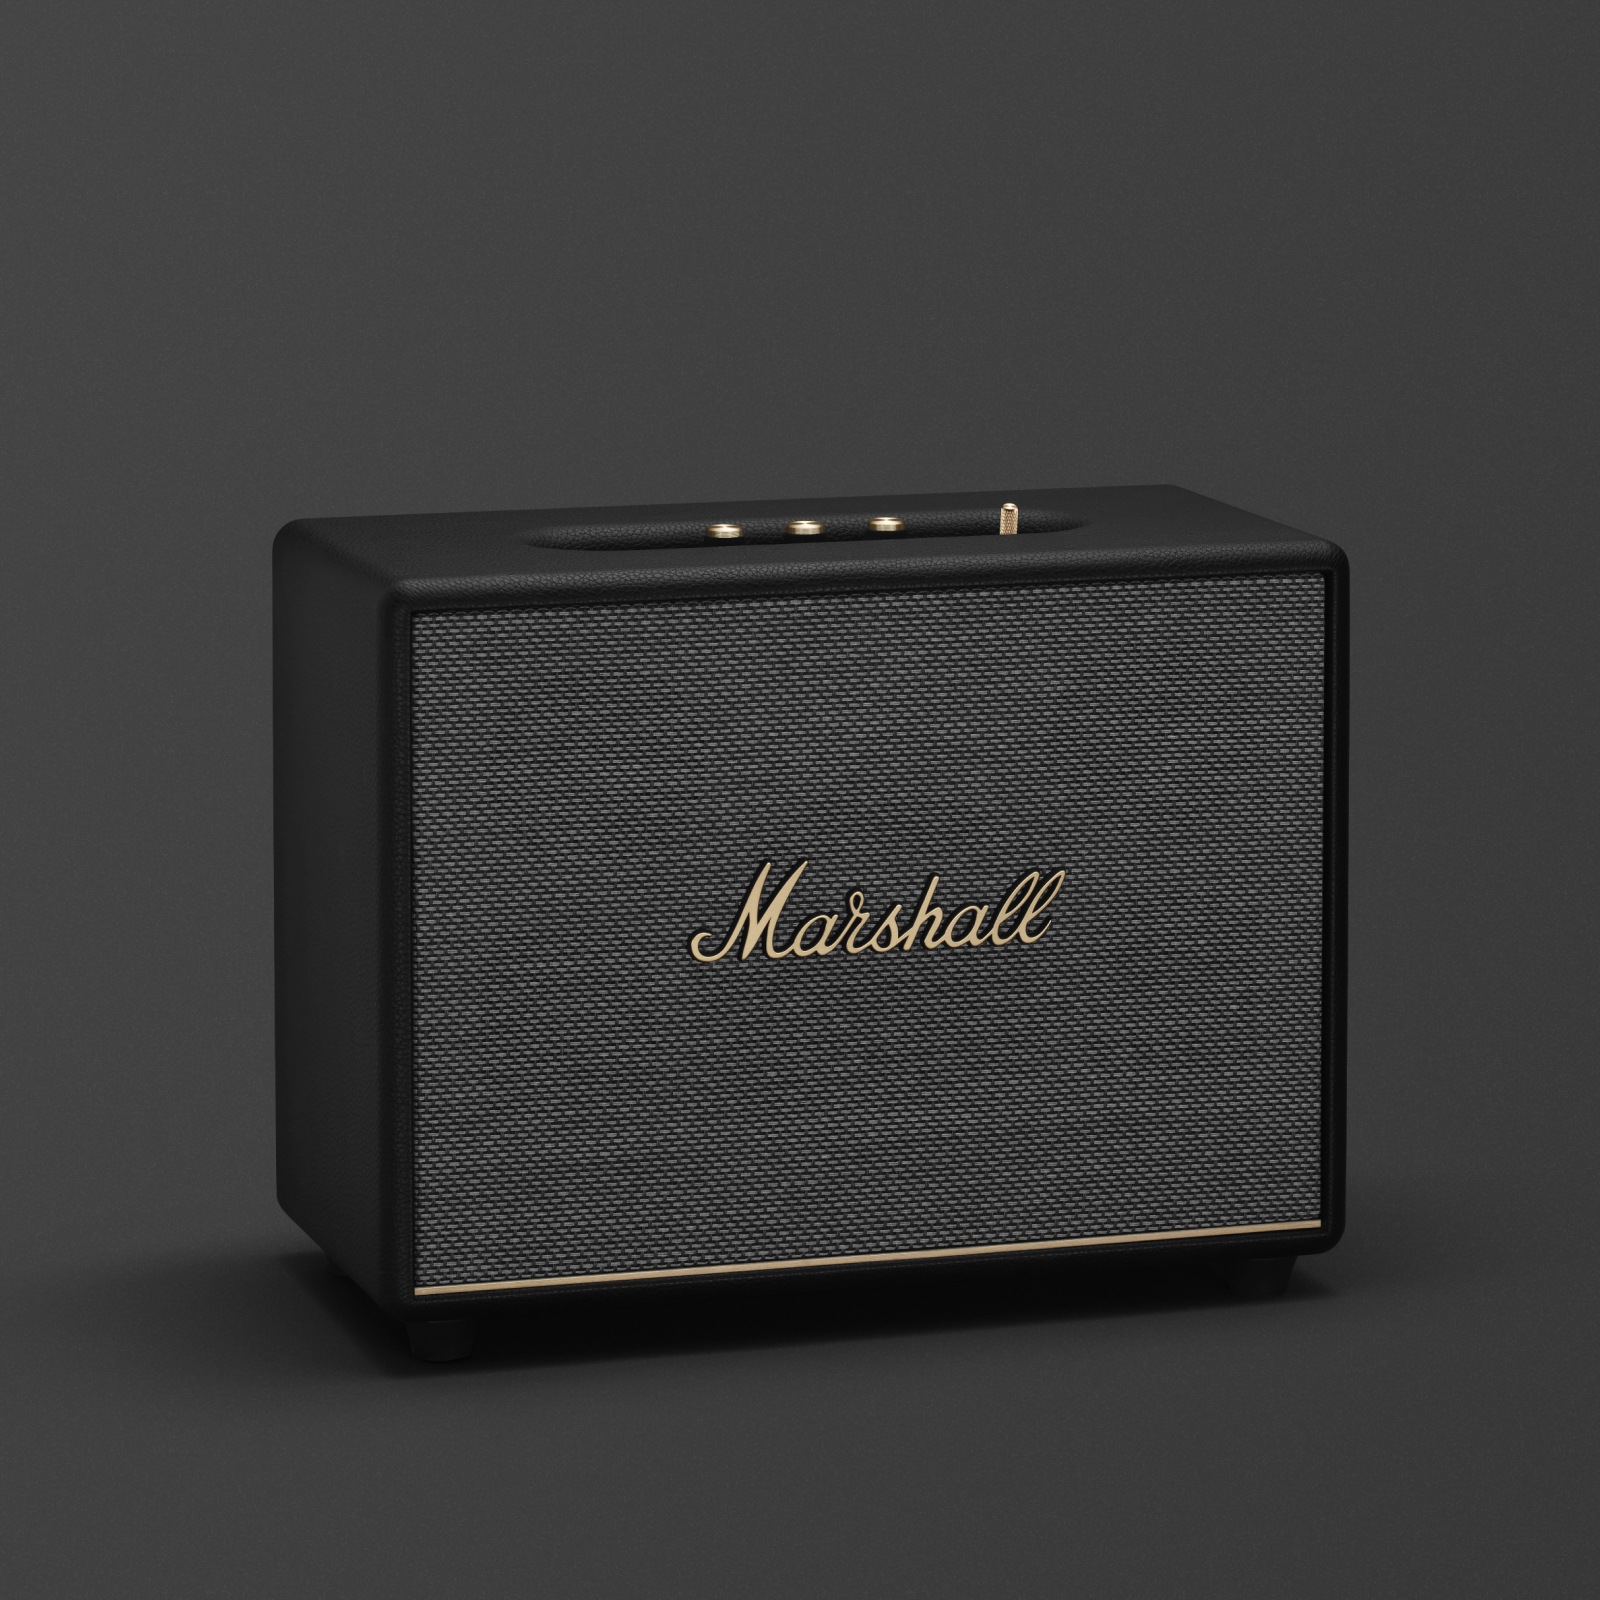 The WOBURN III BLACK from Marshall, a sleek and stylish home speaker in black and gold.